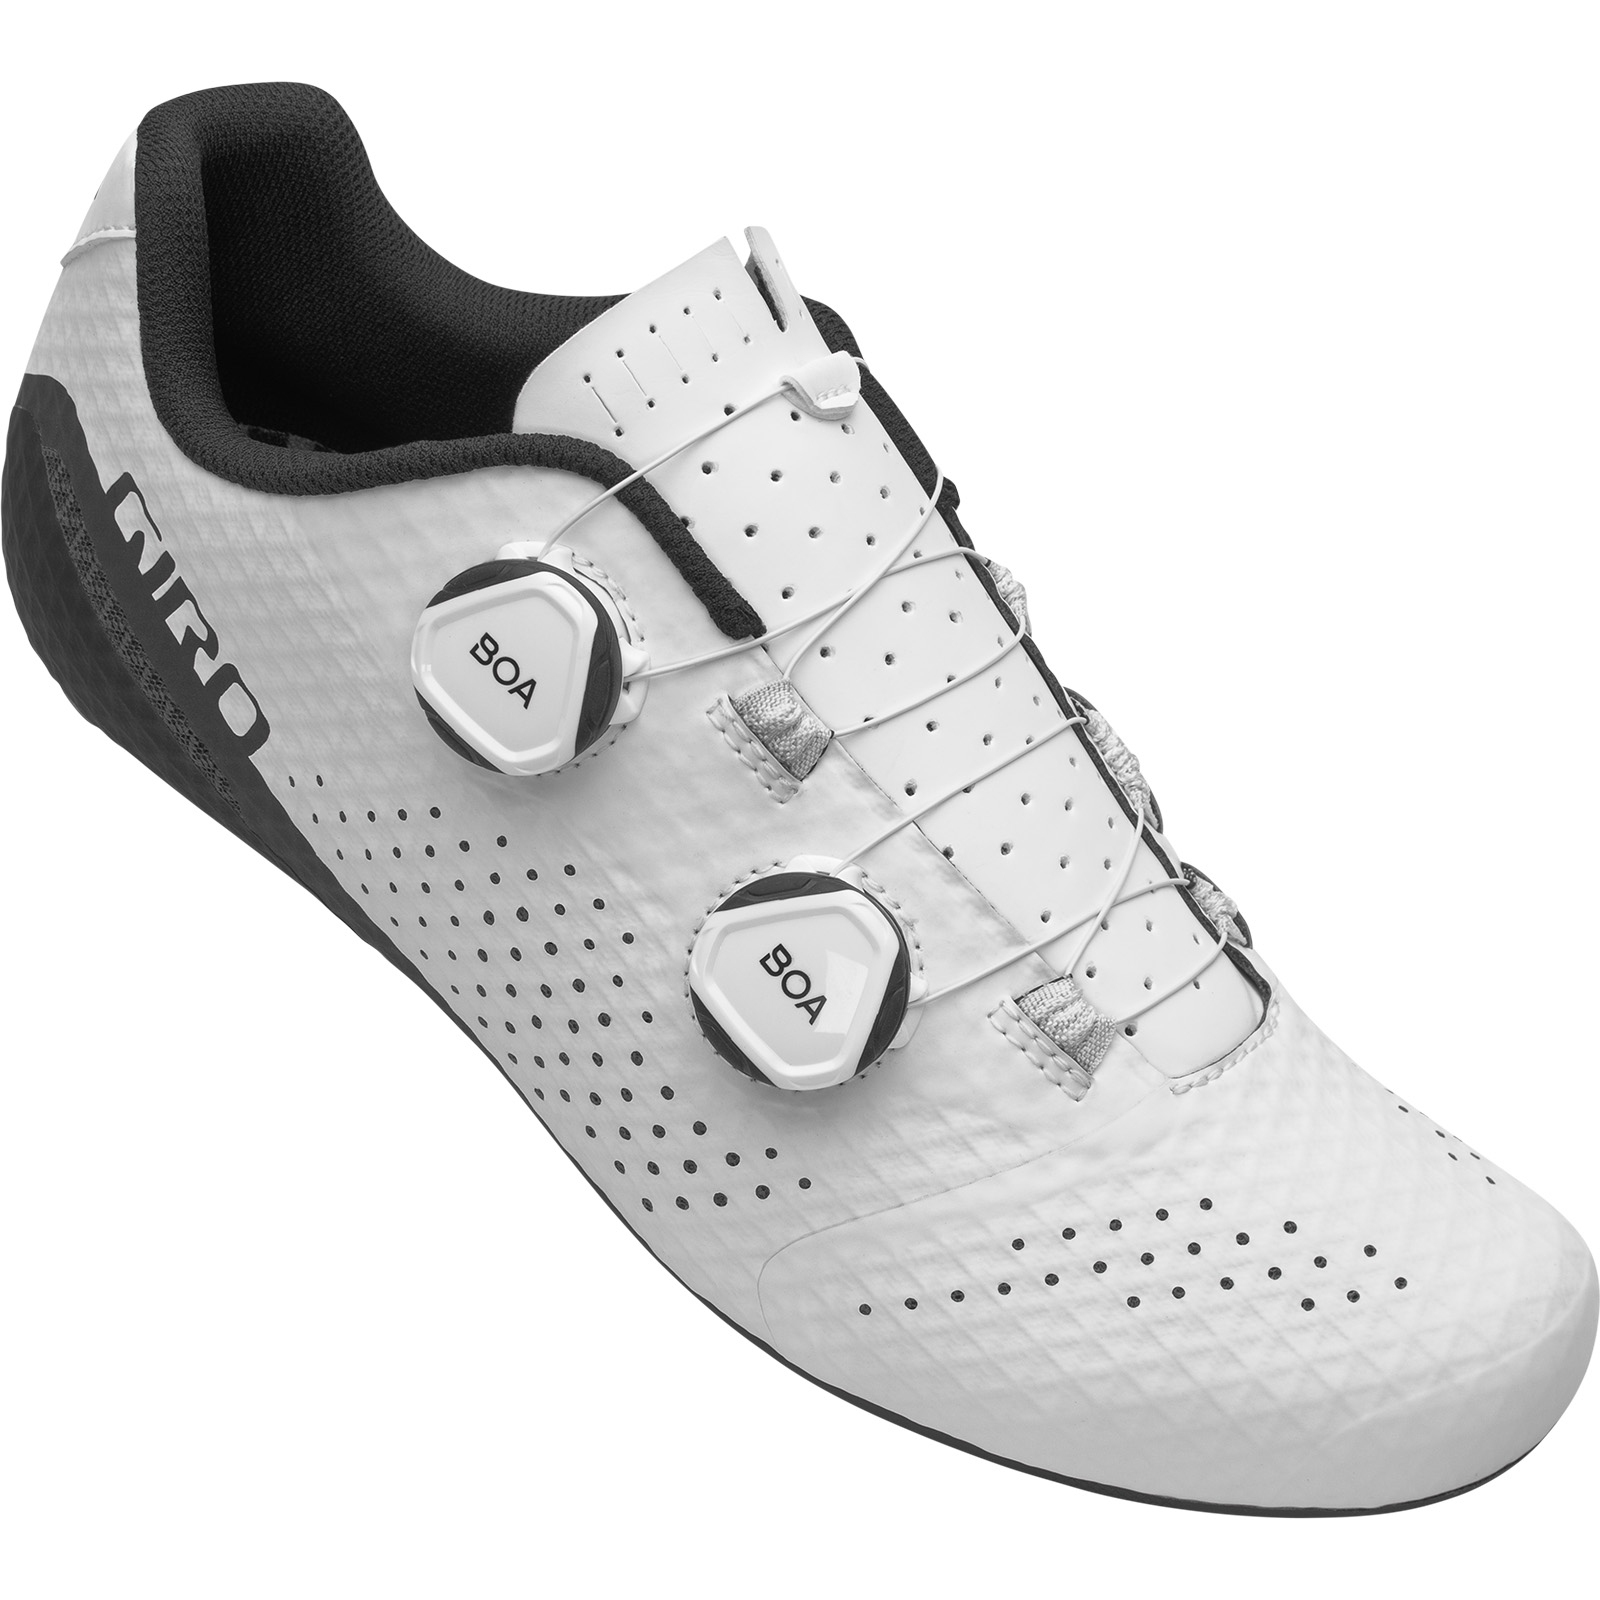 Picture of Giro Regime Road Shoes - white